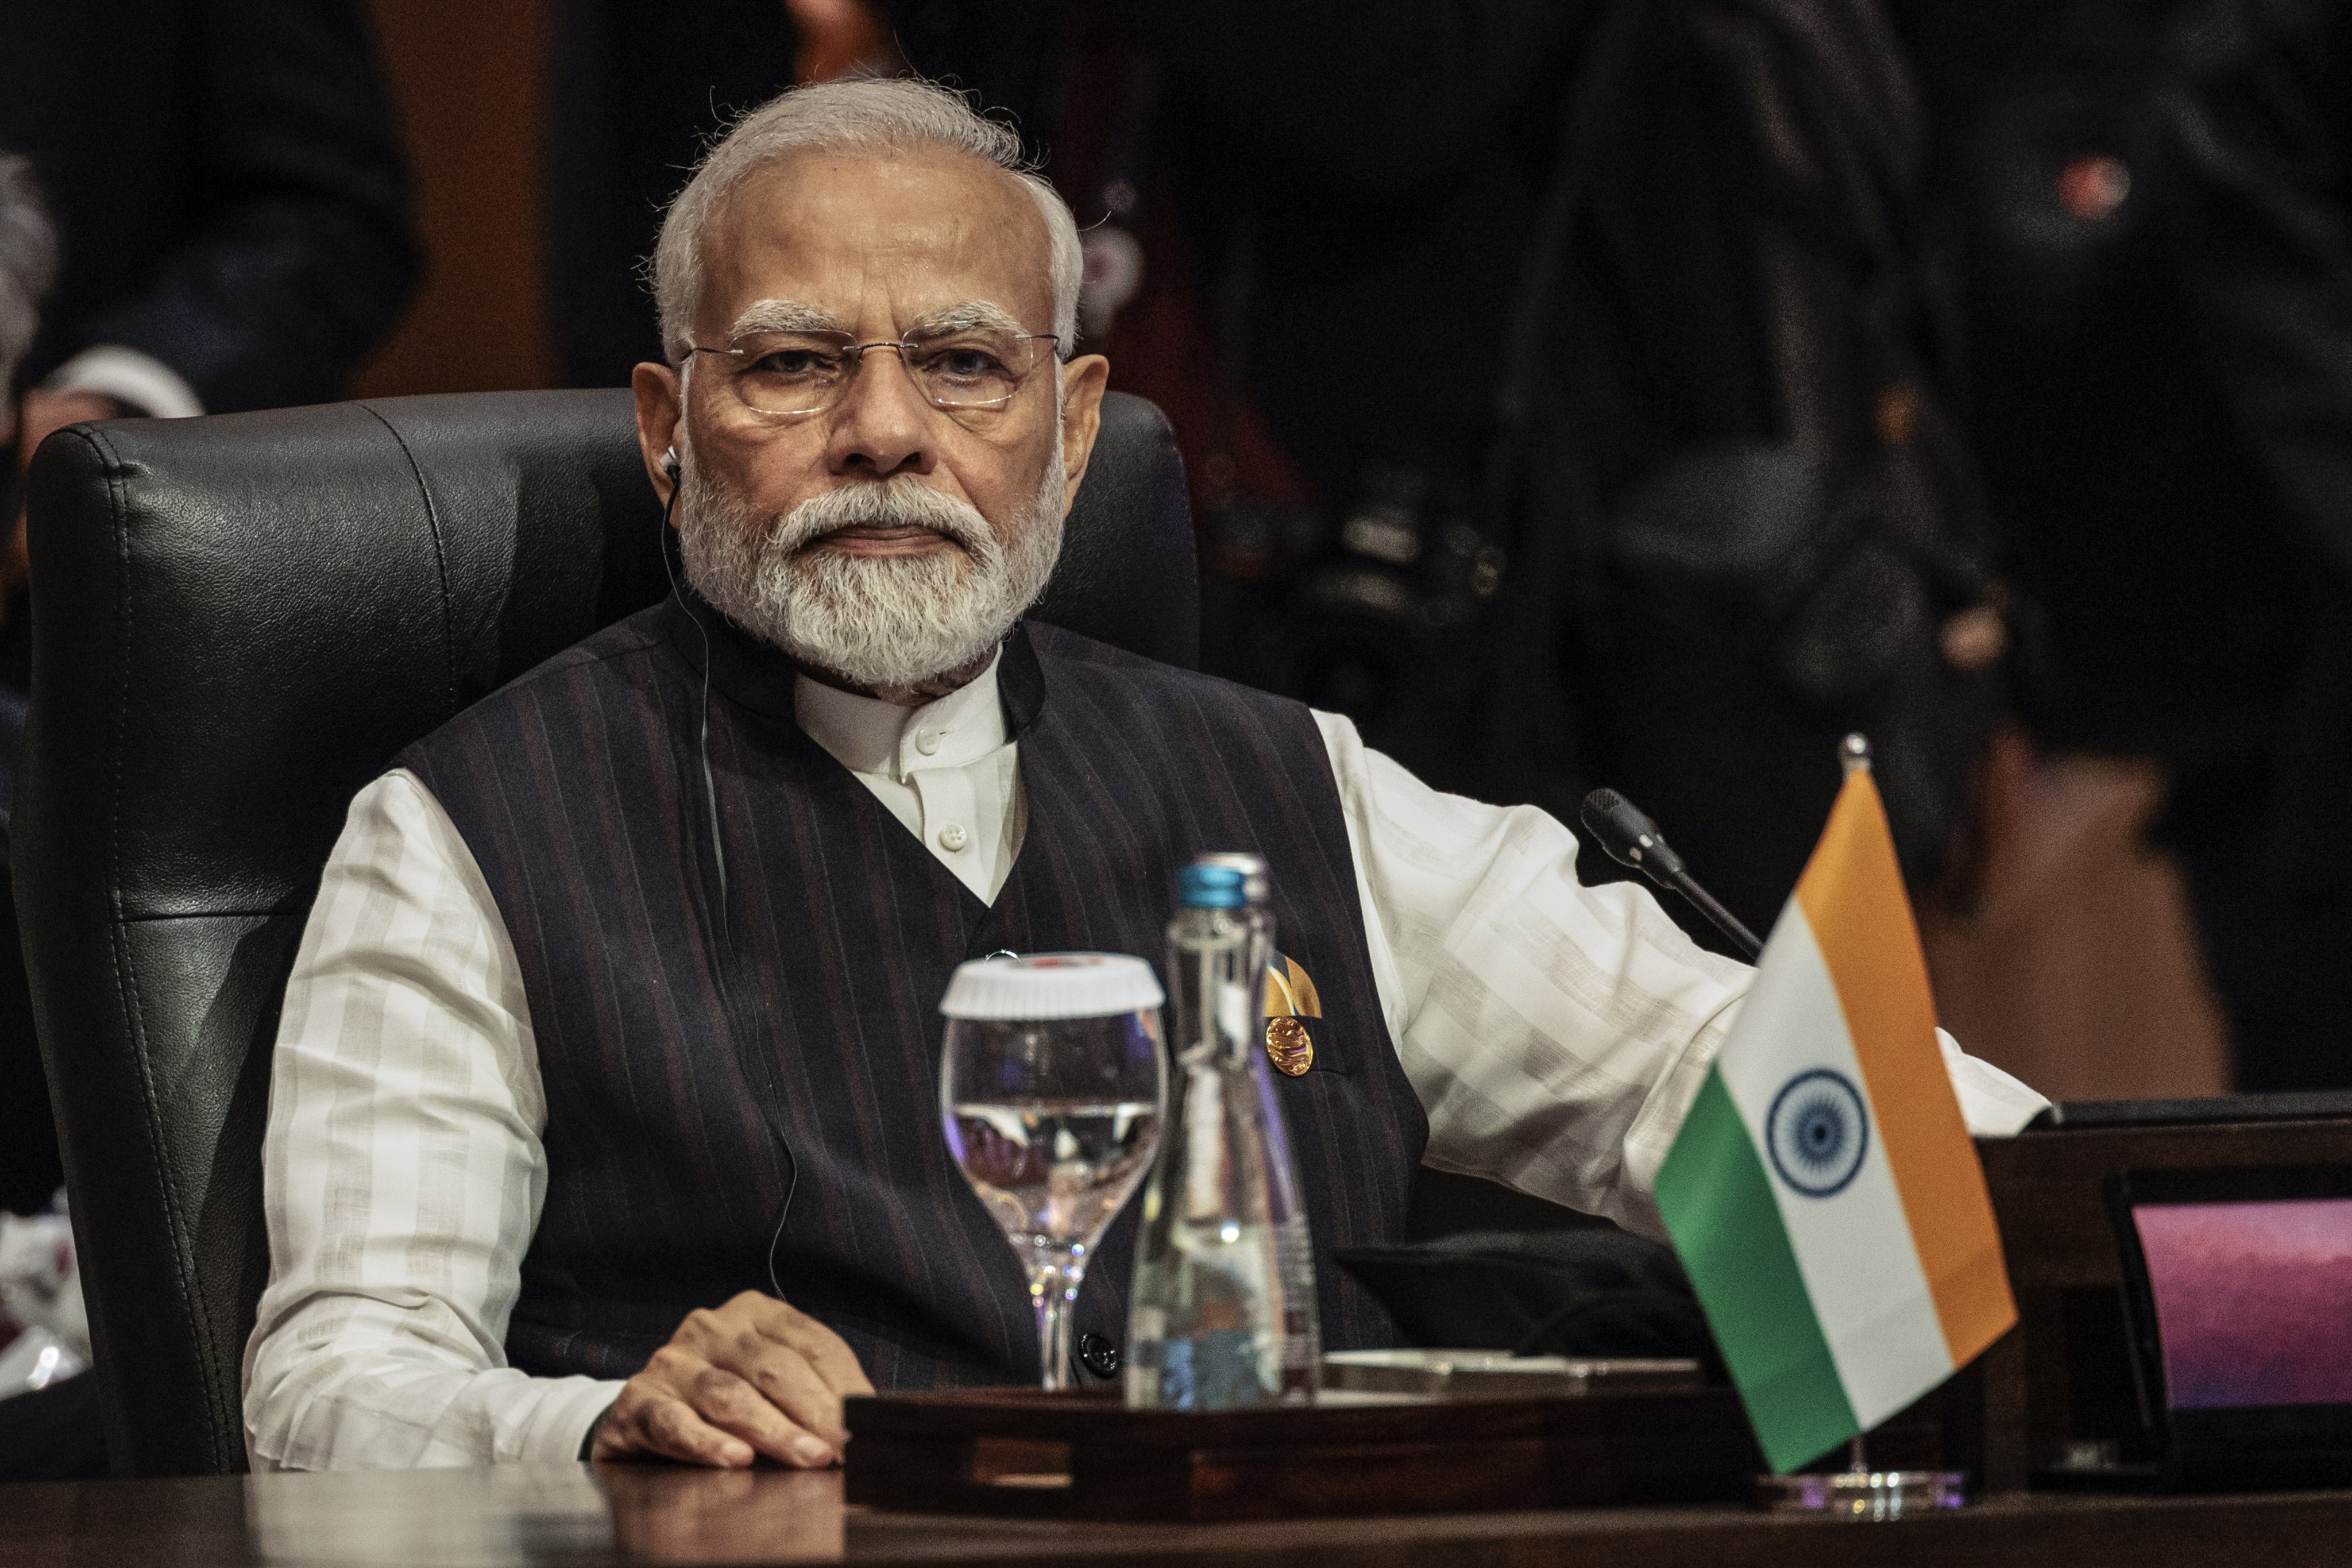 Indian Prime Minister Narendra Modi may be able to use this weekend’s G20 meeting in New Delhi to promote his and India’s standing as a leading voice of the Global South. Photo: EPA-EFE